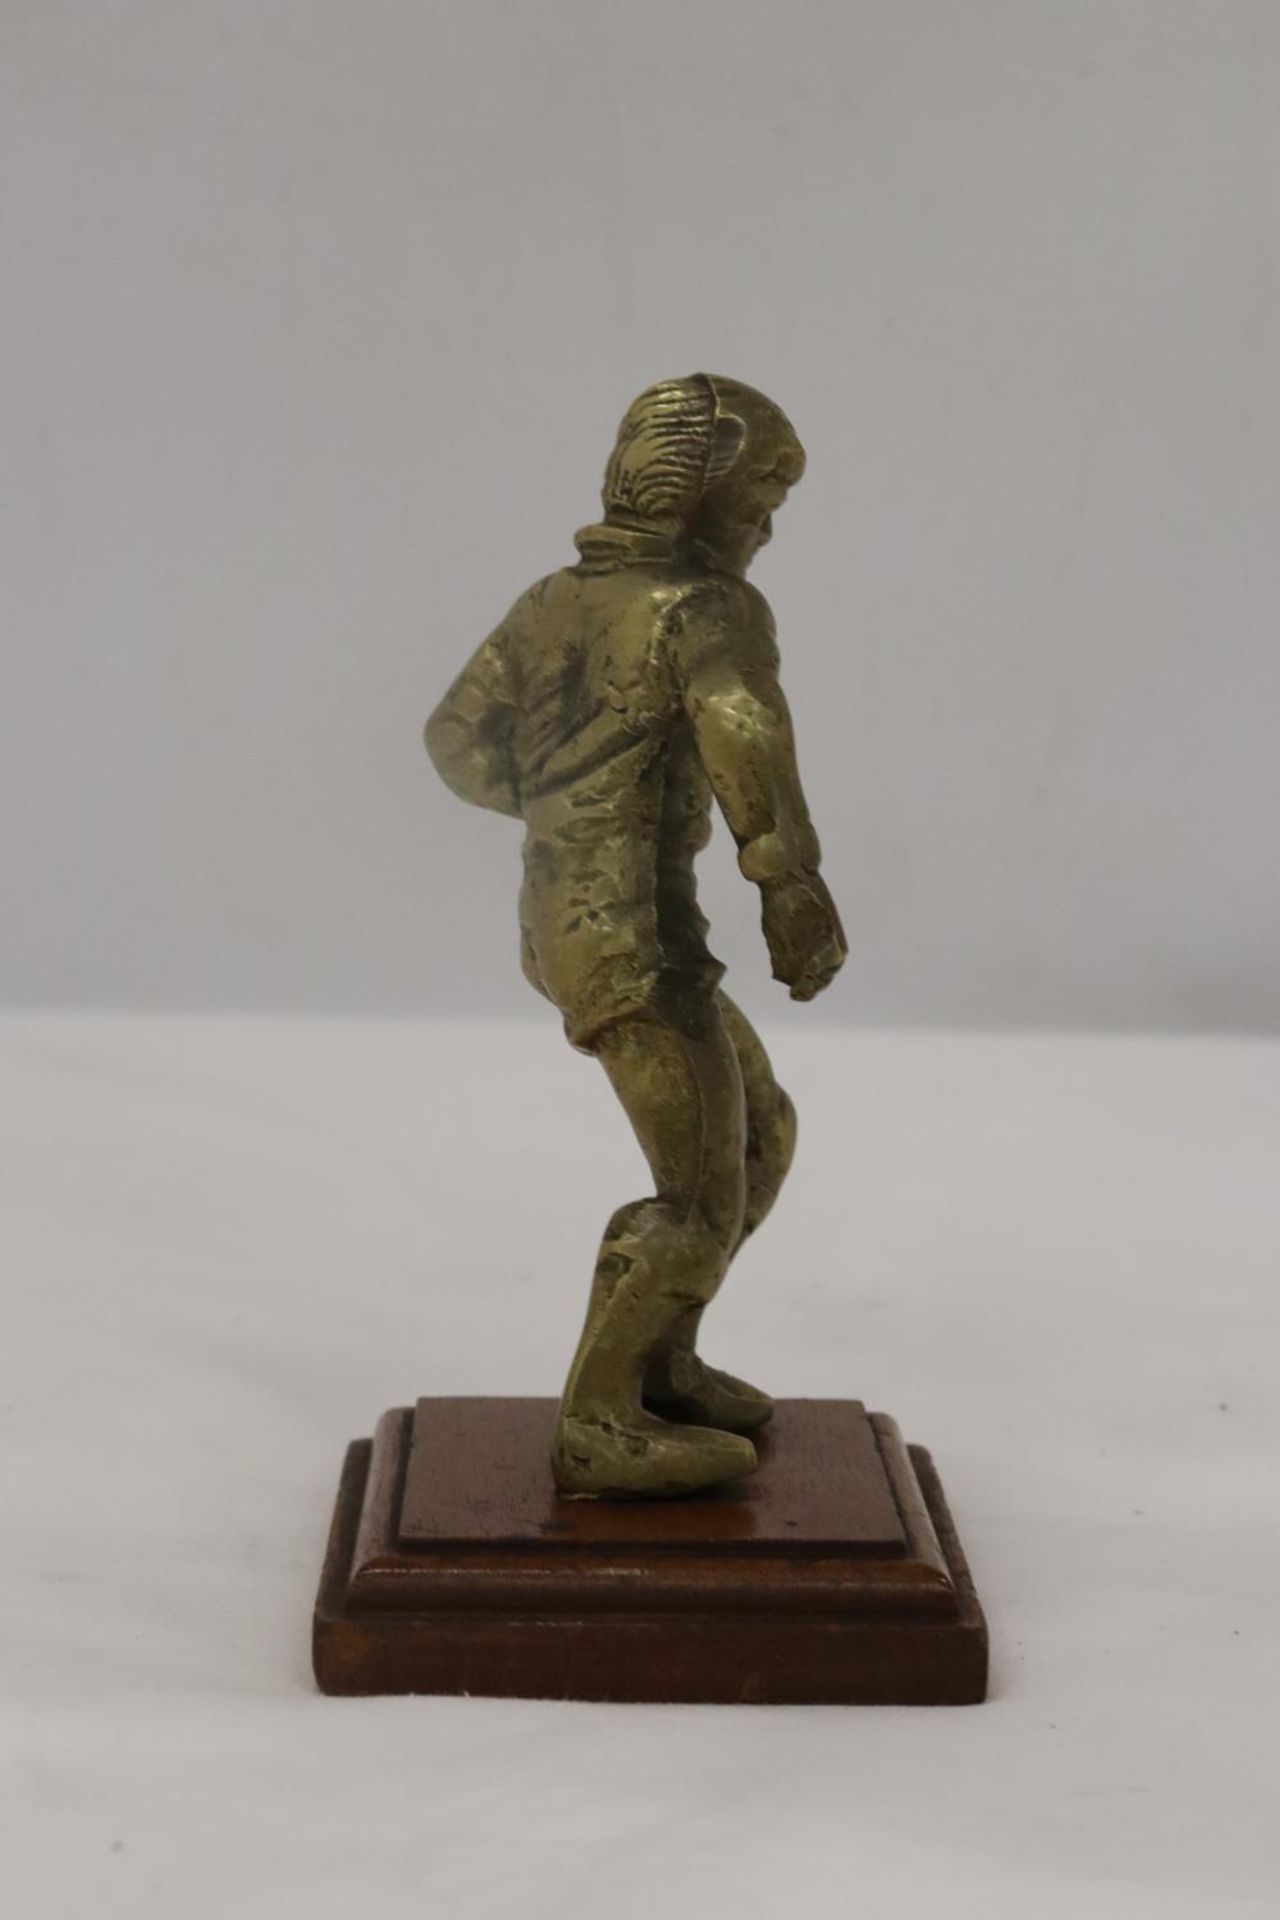 A VINTAGE BRASS RUGBY PLAYER ON A WOODEN PLINTH - Image 2 of 5